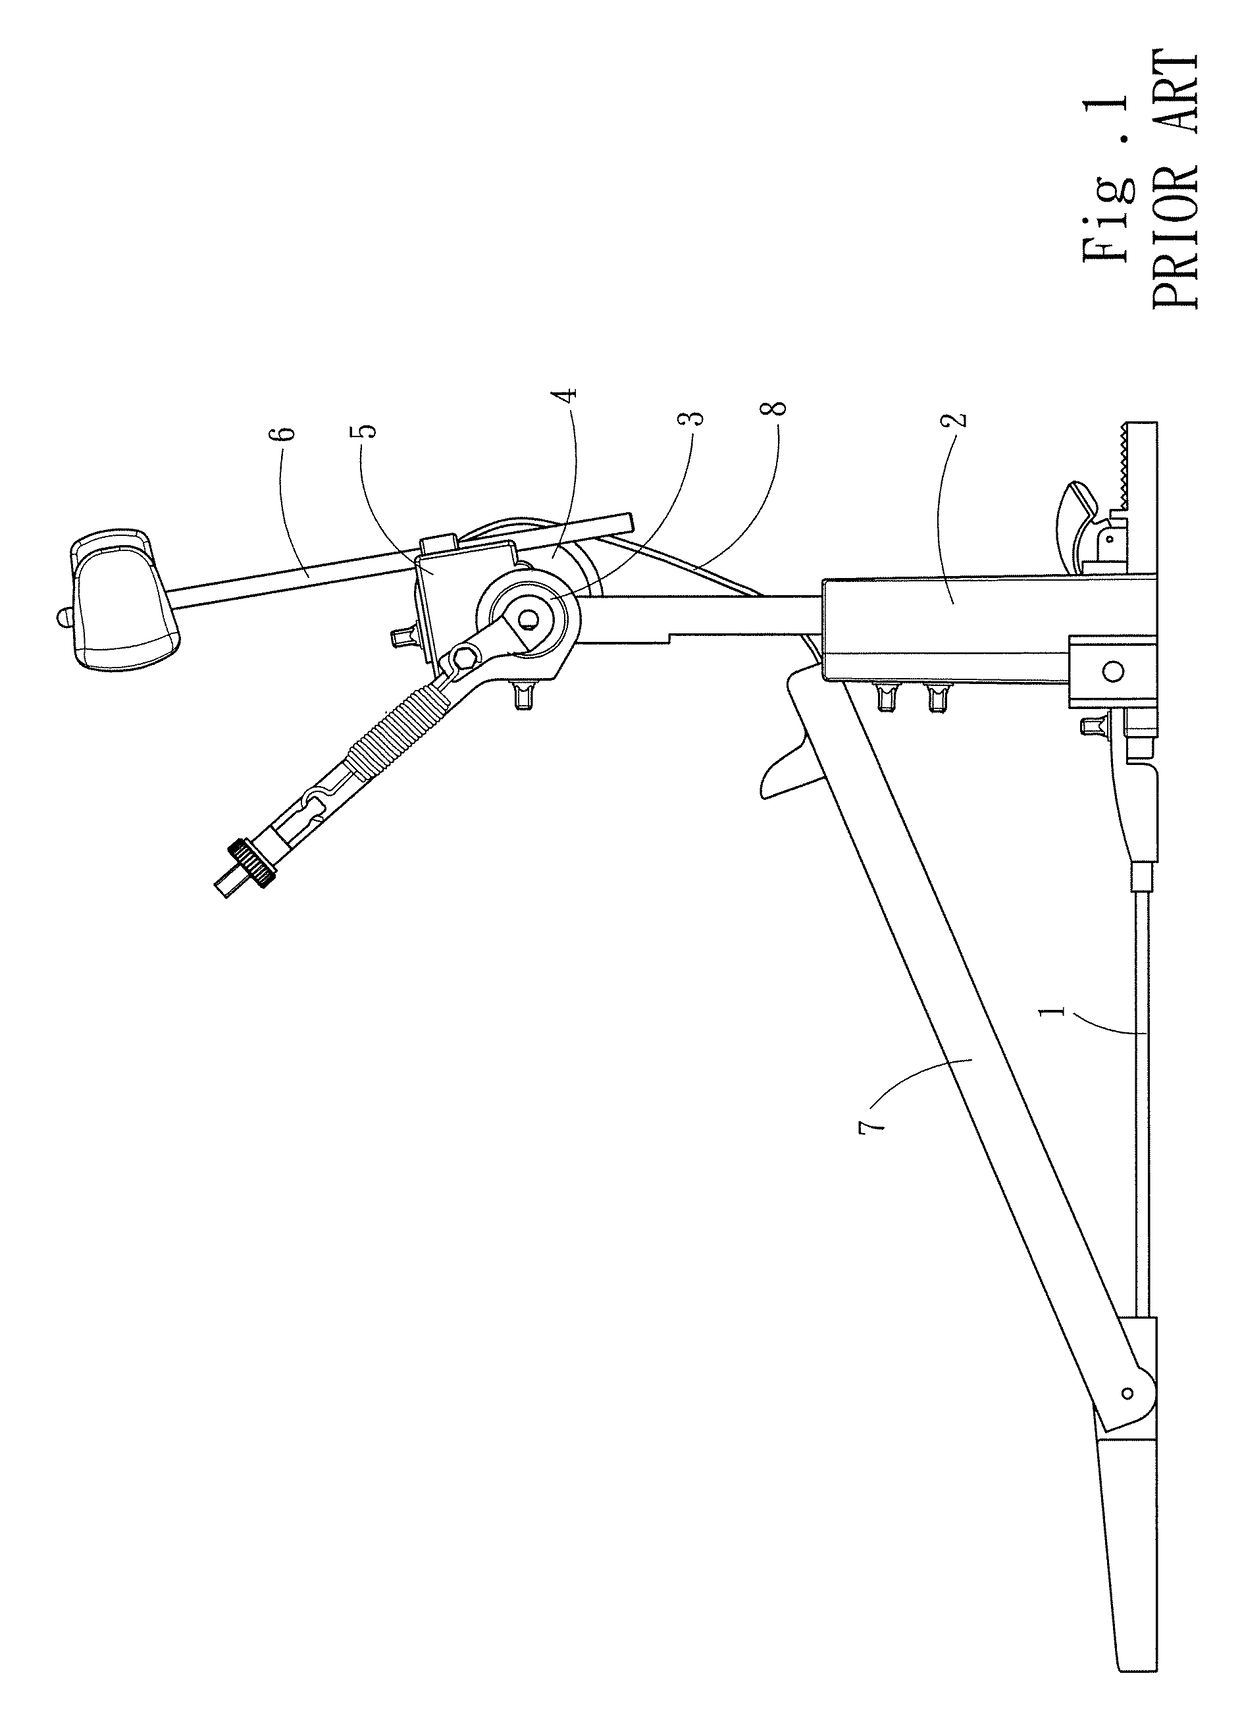 Musical instrument pedal with drumstick angle adjustment structure